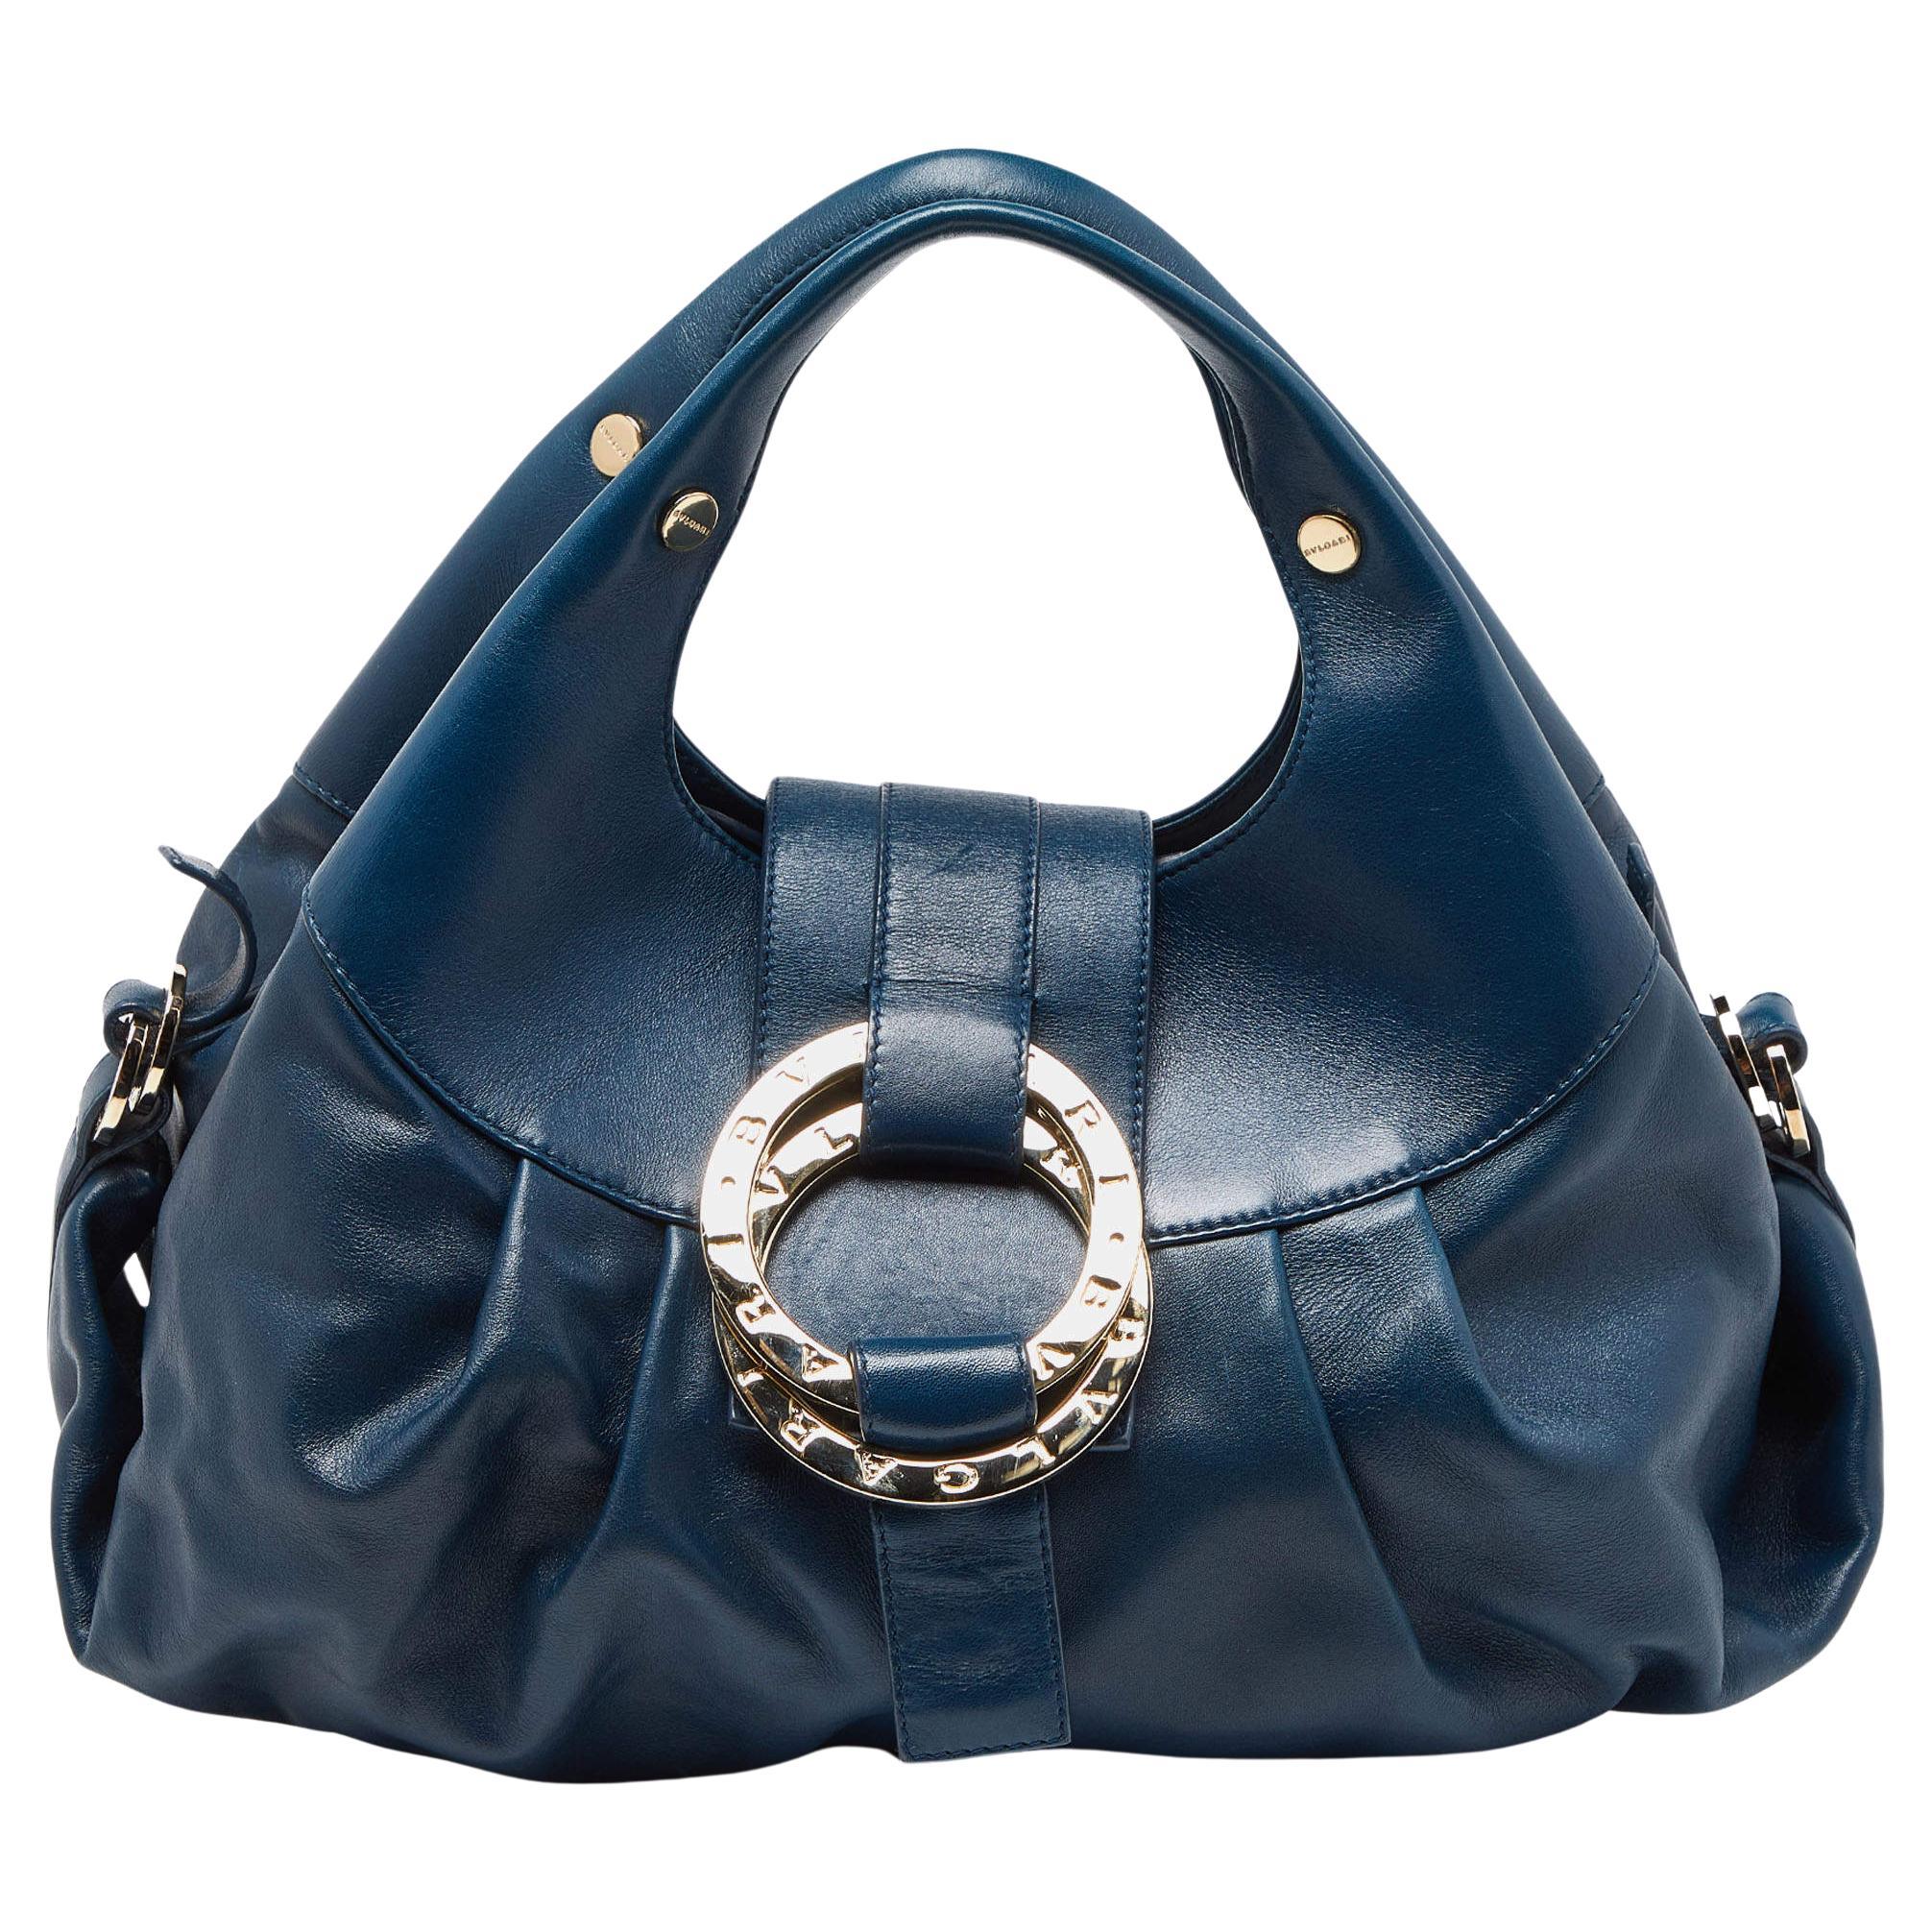 Bvlgari Teal Blue Leather Chandra Hobo For Sale